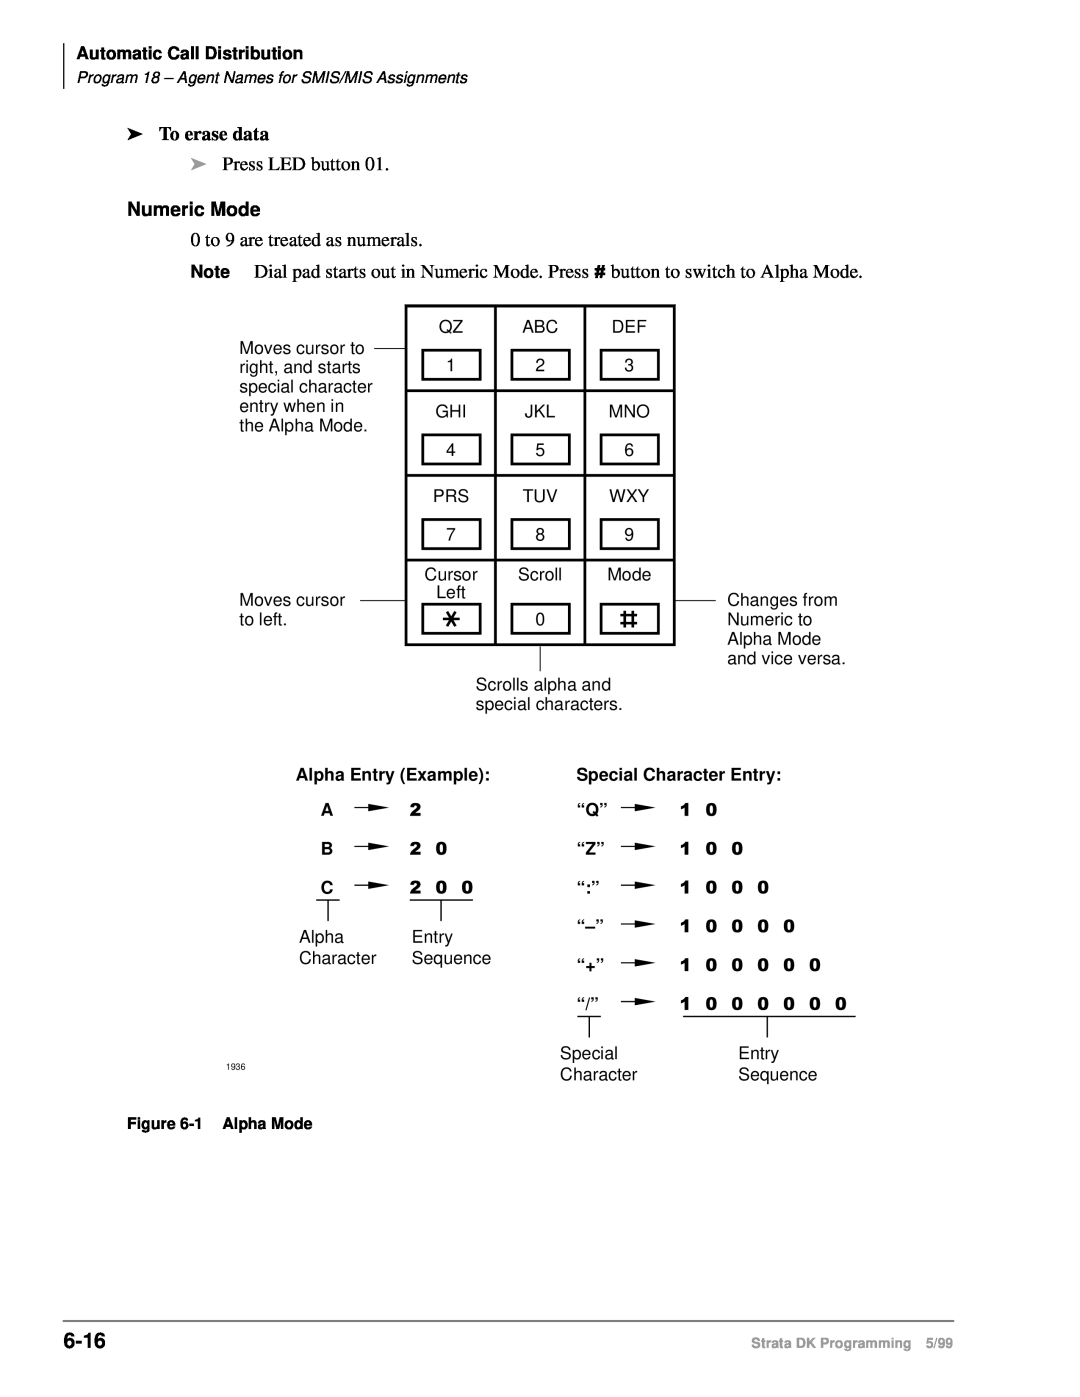 Toshiba dk14 manual 6-16, Numeric Mode, Automatic Call Distribution, Alpha Entry Example, Special Character Entry, Sequence 